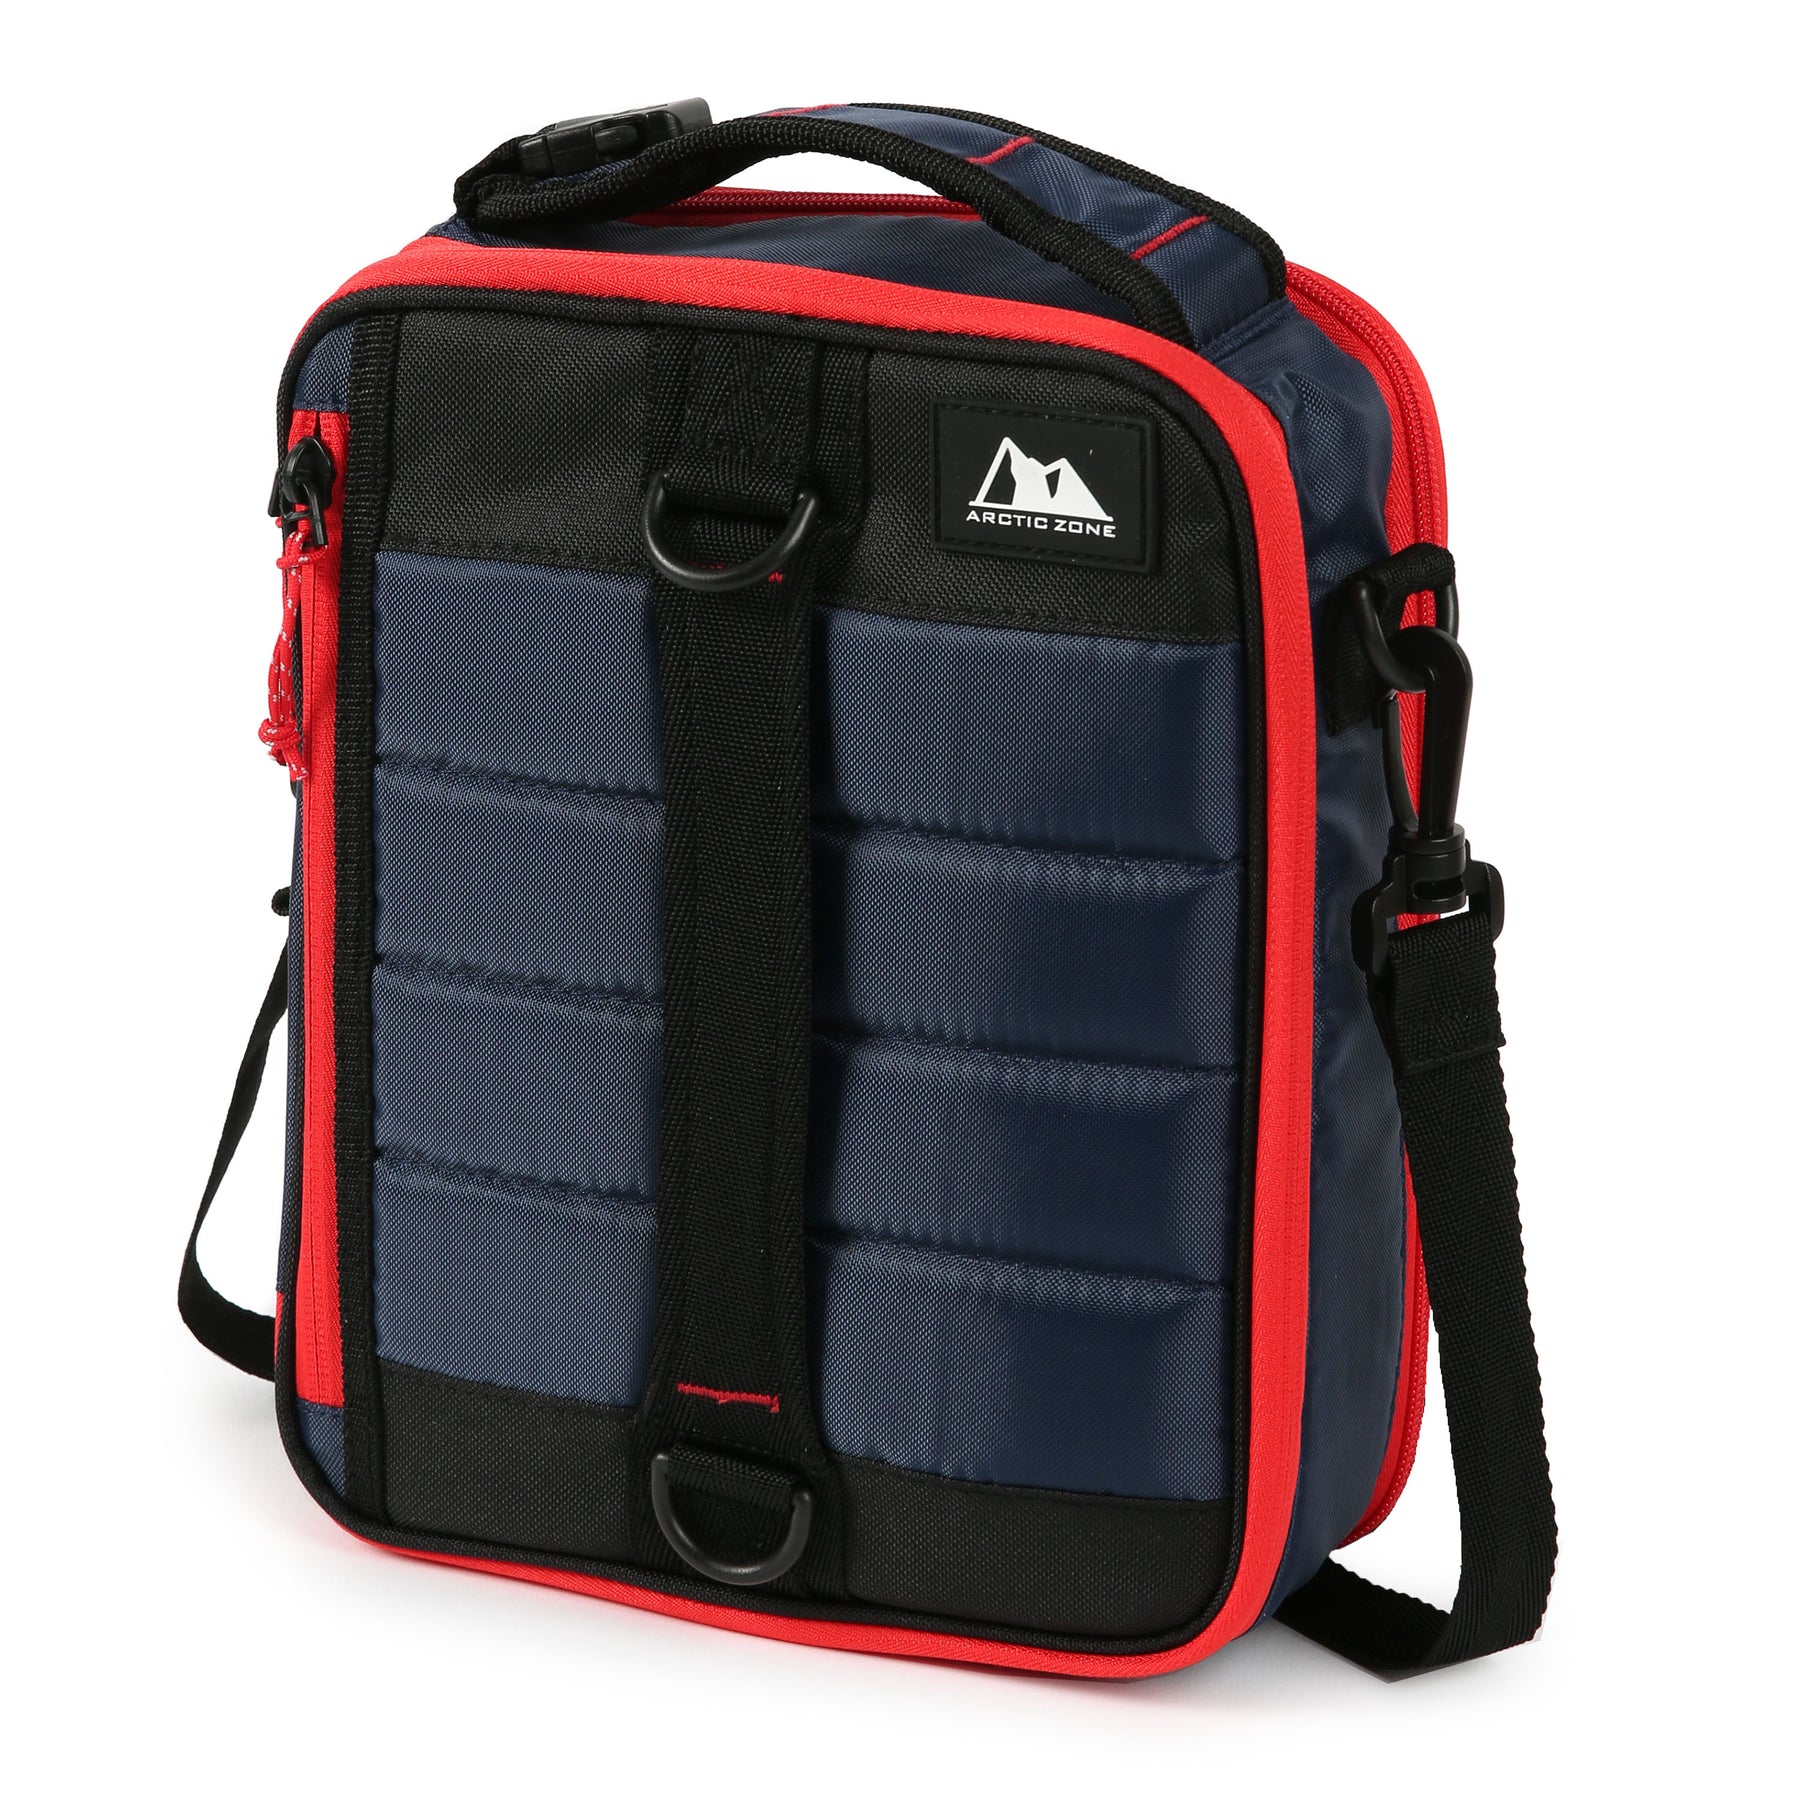 Arctic Zone® High Performance Ultimate Upright Expandable Lunch Pack | Arctic Zone